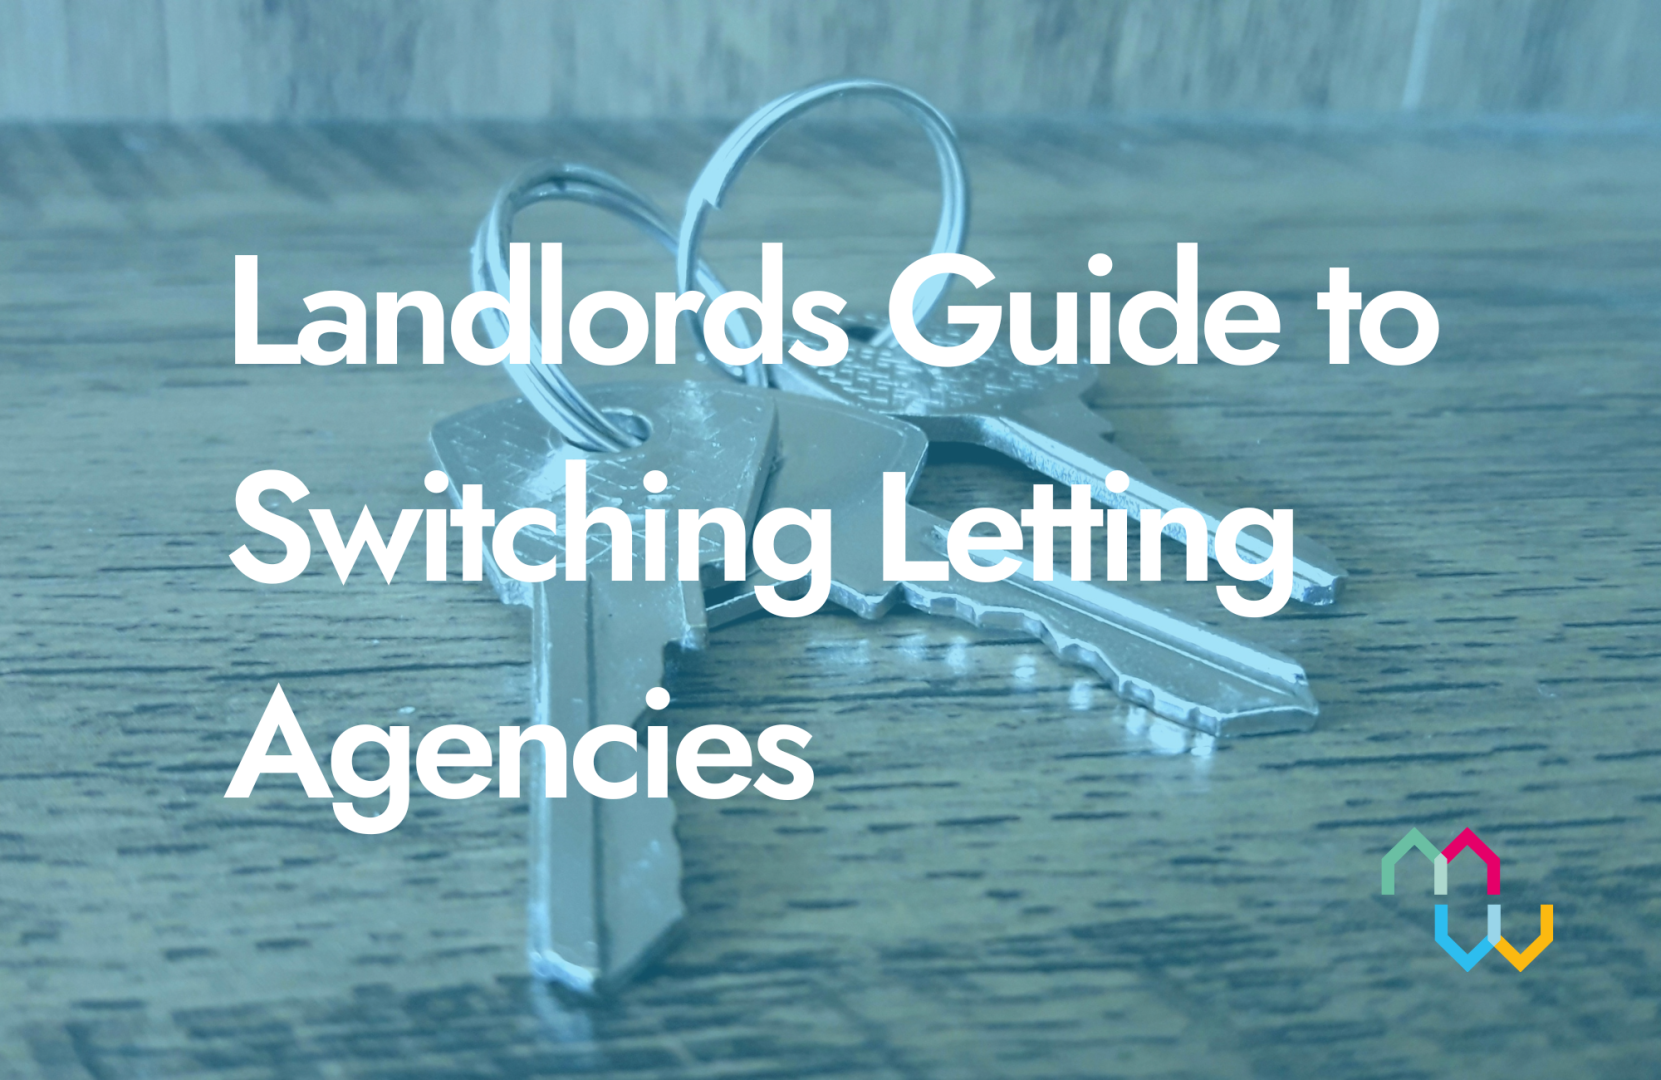 Landlords Guide to Switching Letting Agencies